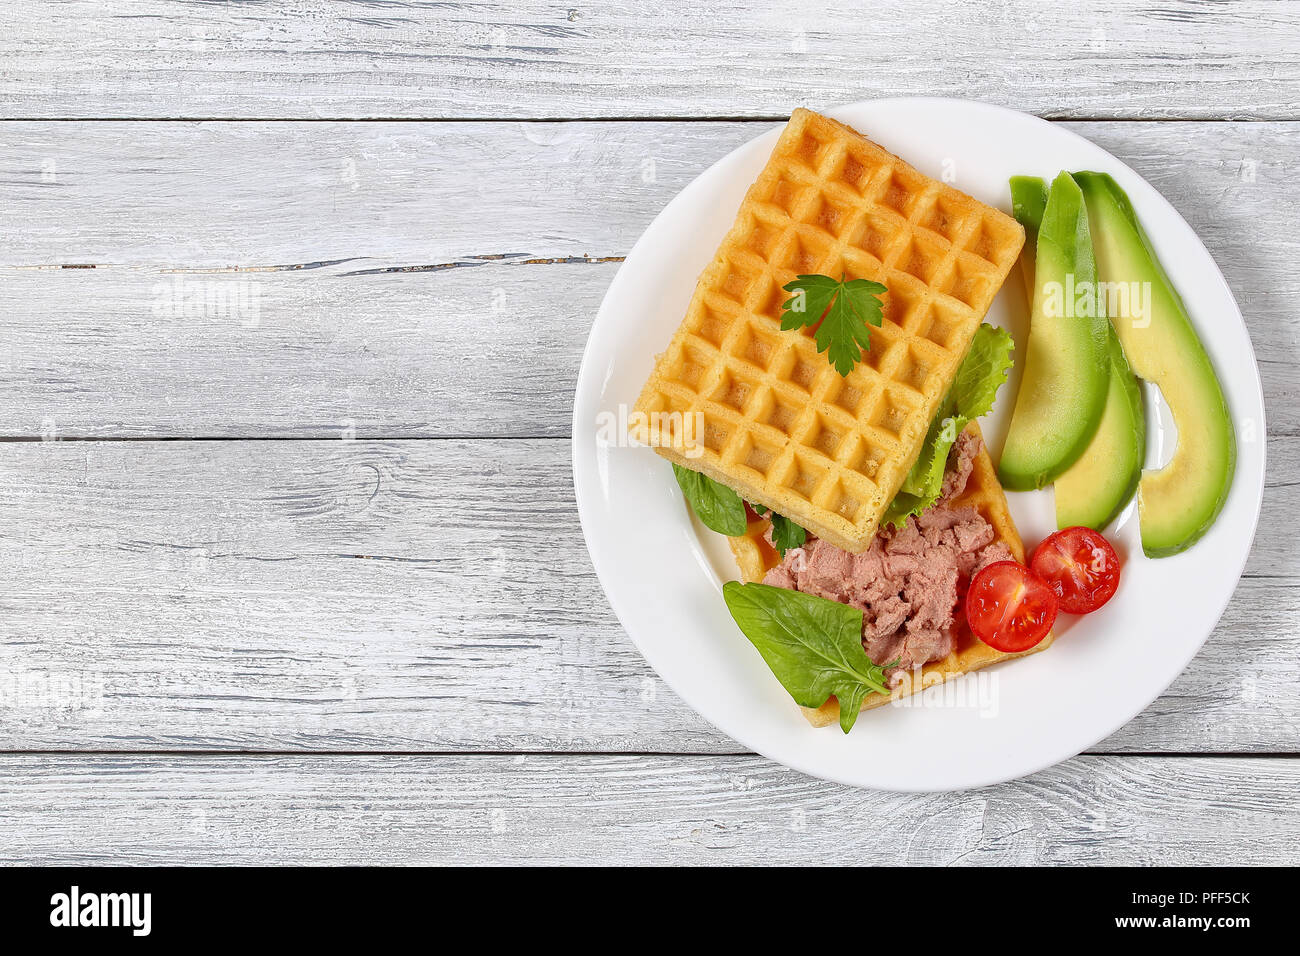 delicious salted belgian waffles sandwich with avocado slices, turkey liver pate, lettuce, spinach and parsley on white plate with cherry tomatoes, vi Stock Photo